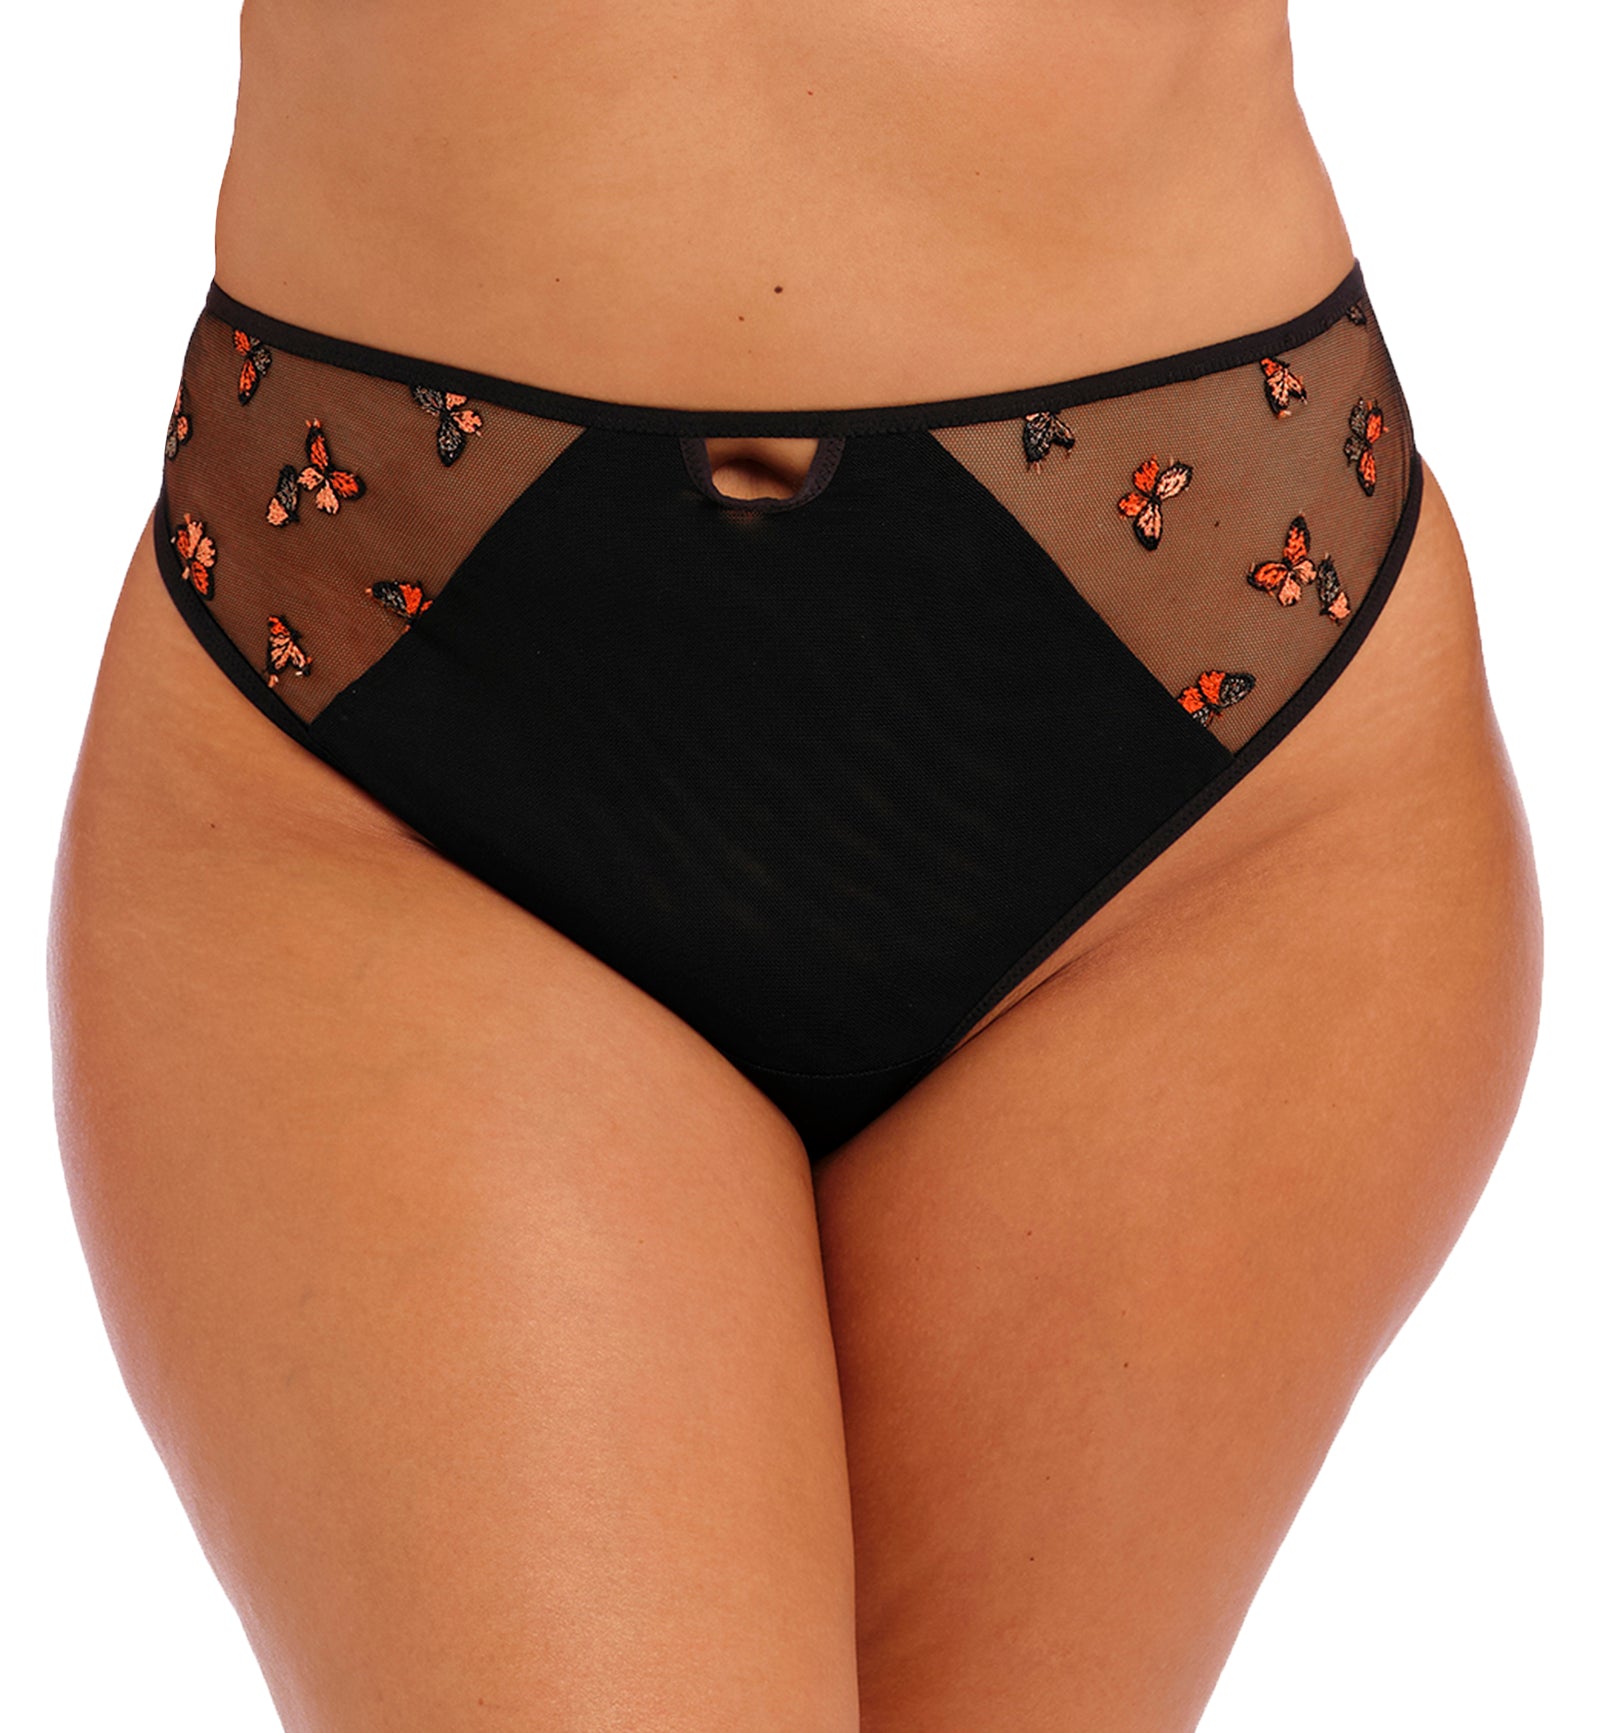 Elomi Sachi Matching Strappy Thong (4357),Small,Black Butterfly - Black Butterfly,Small